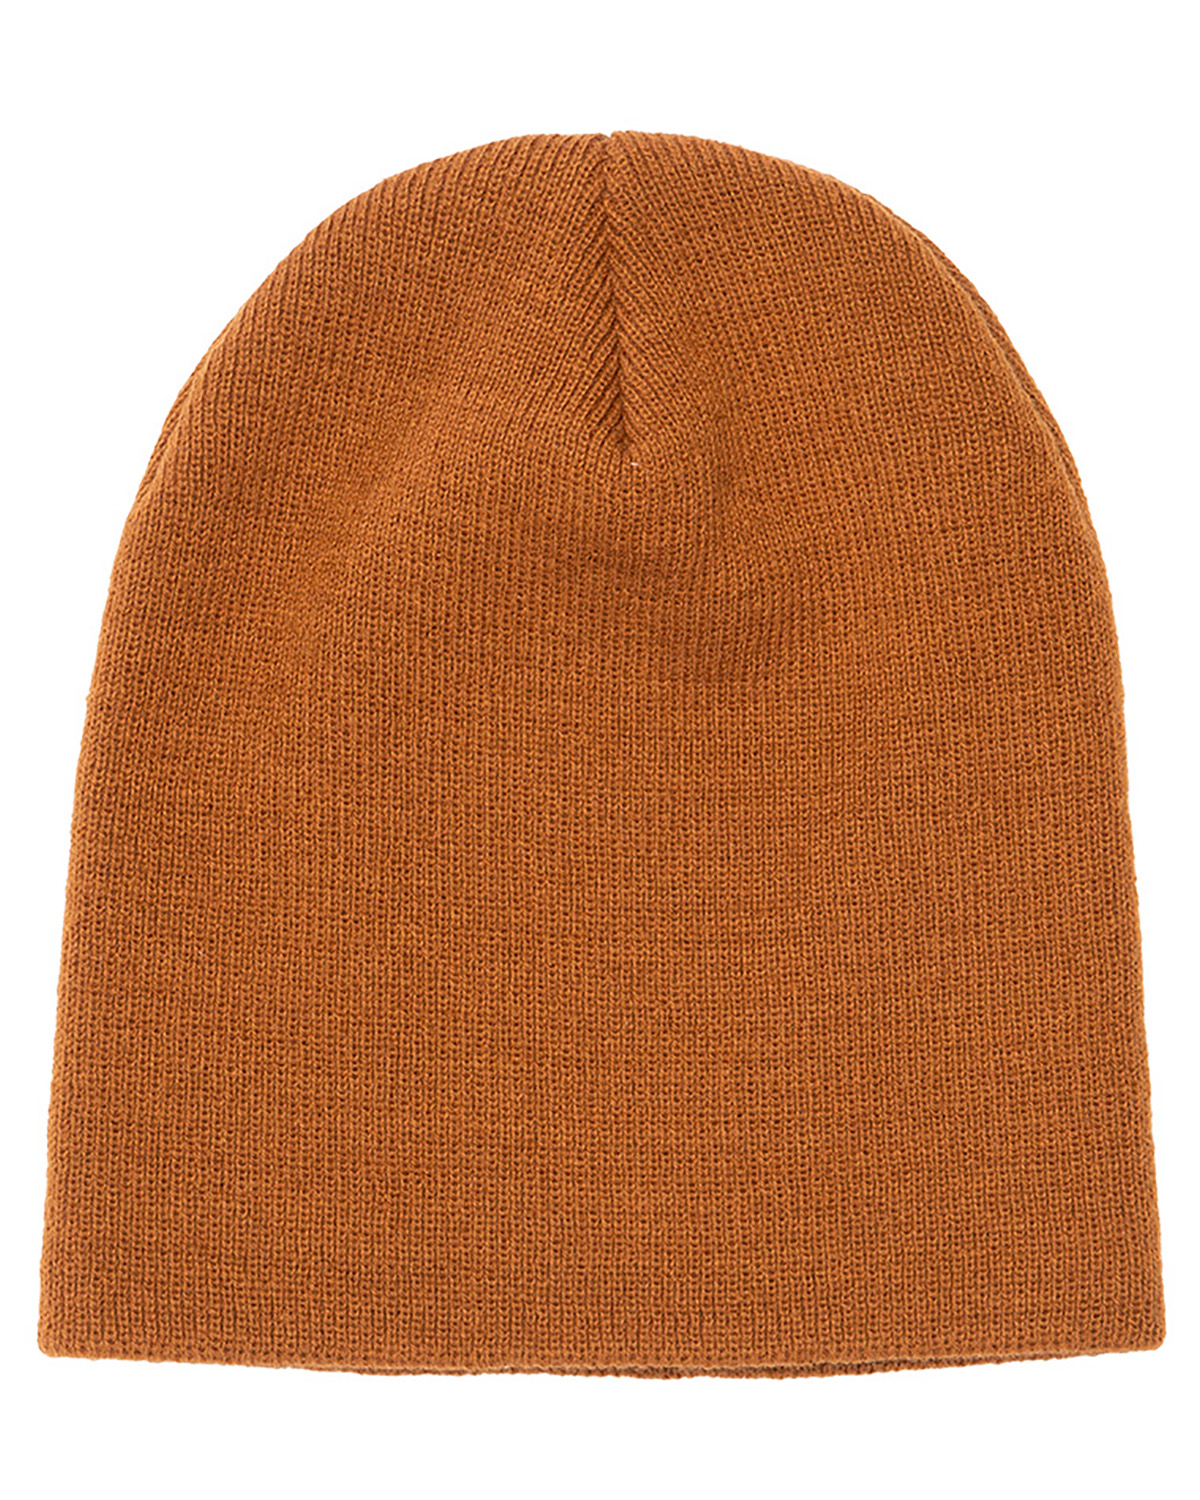 Yupoong 1500 | Adult Knit Beanie | ShirtSpace